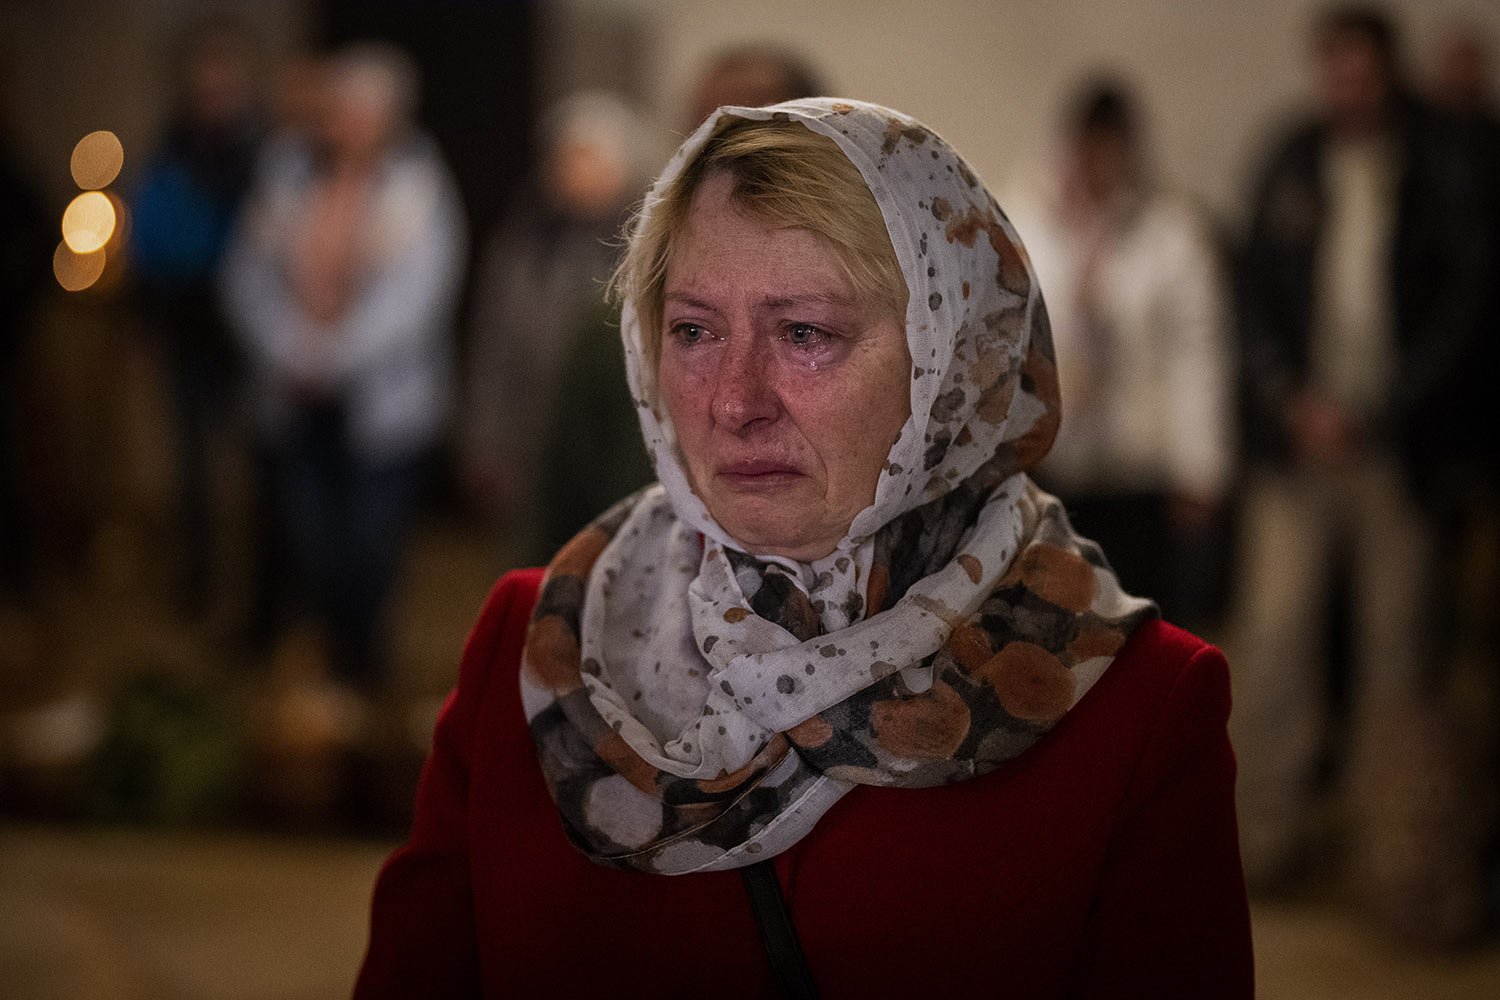  Olga Zhovtobrukh, 55, cries during an Easter service at a church in Bucha on the outskirts of Kyiv, on Sunday, April 24, 2022. (AP Photo/Emilio Morenatti) 